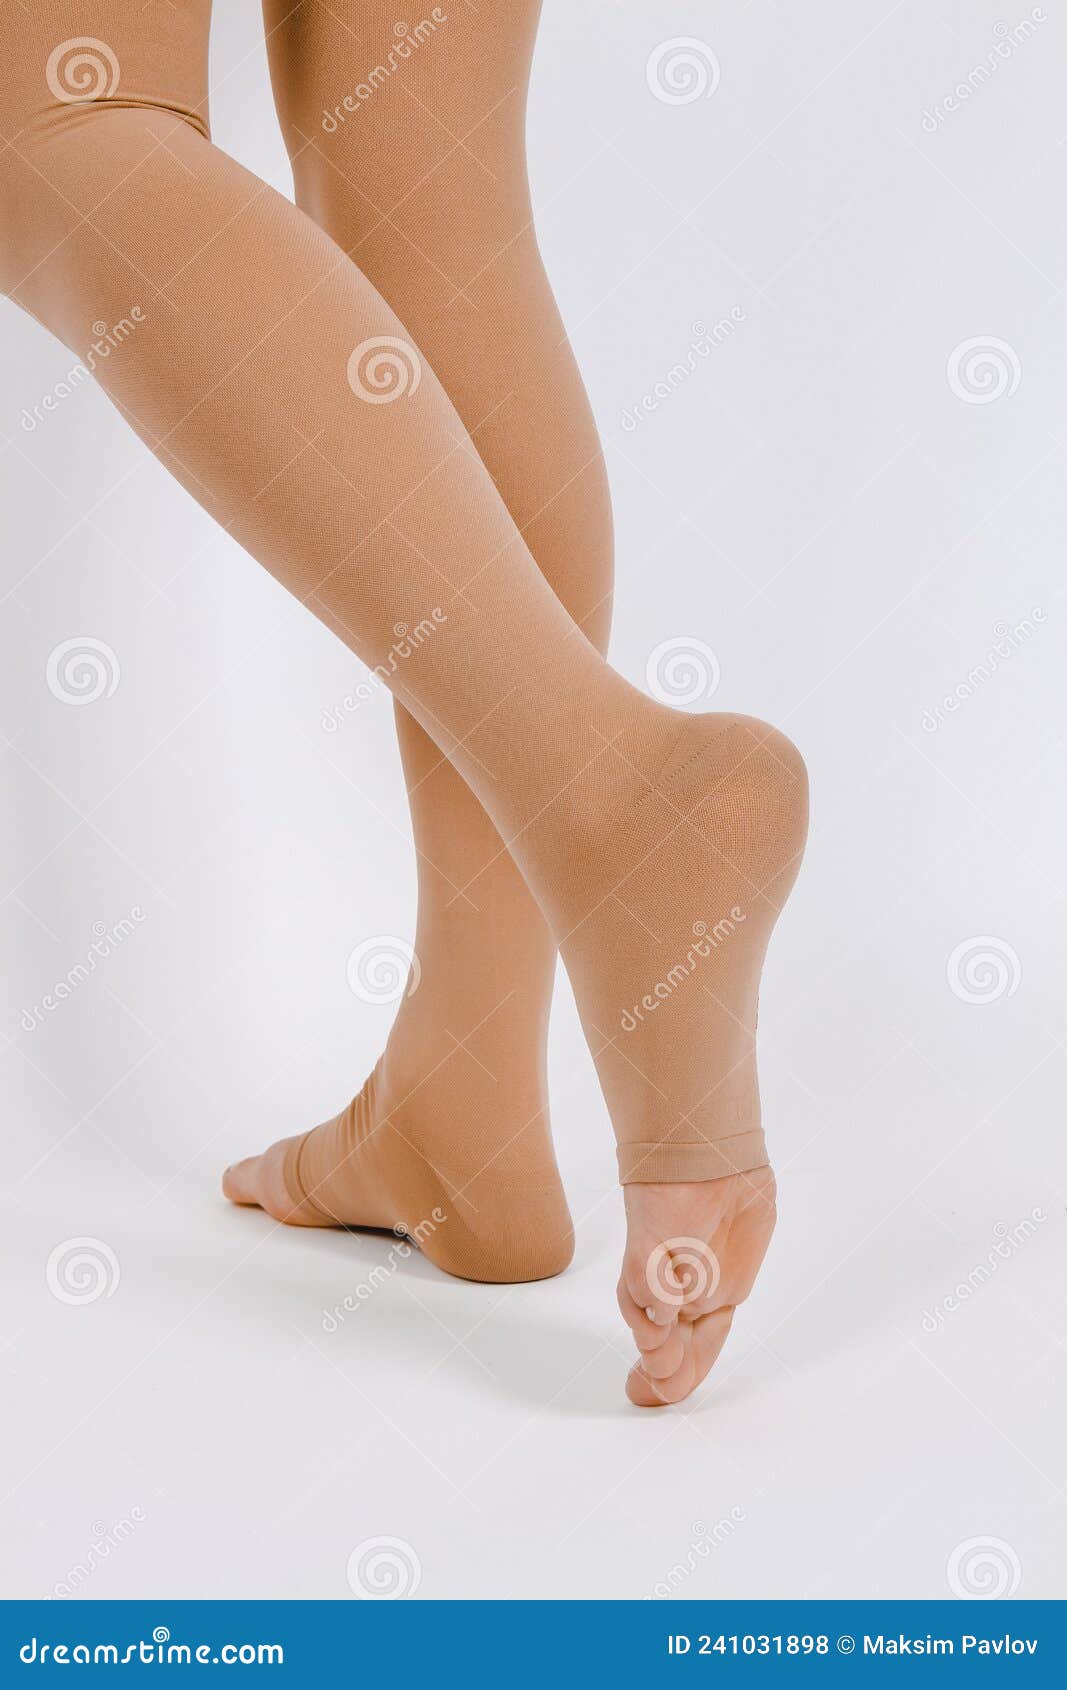 Compression Hosiery. Medical Compression Stockings and Tights for Varicose  Veins and Venouse Therapy Stock Photo - Image of foot, kneehigh: 241031898